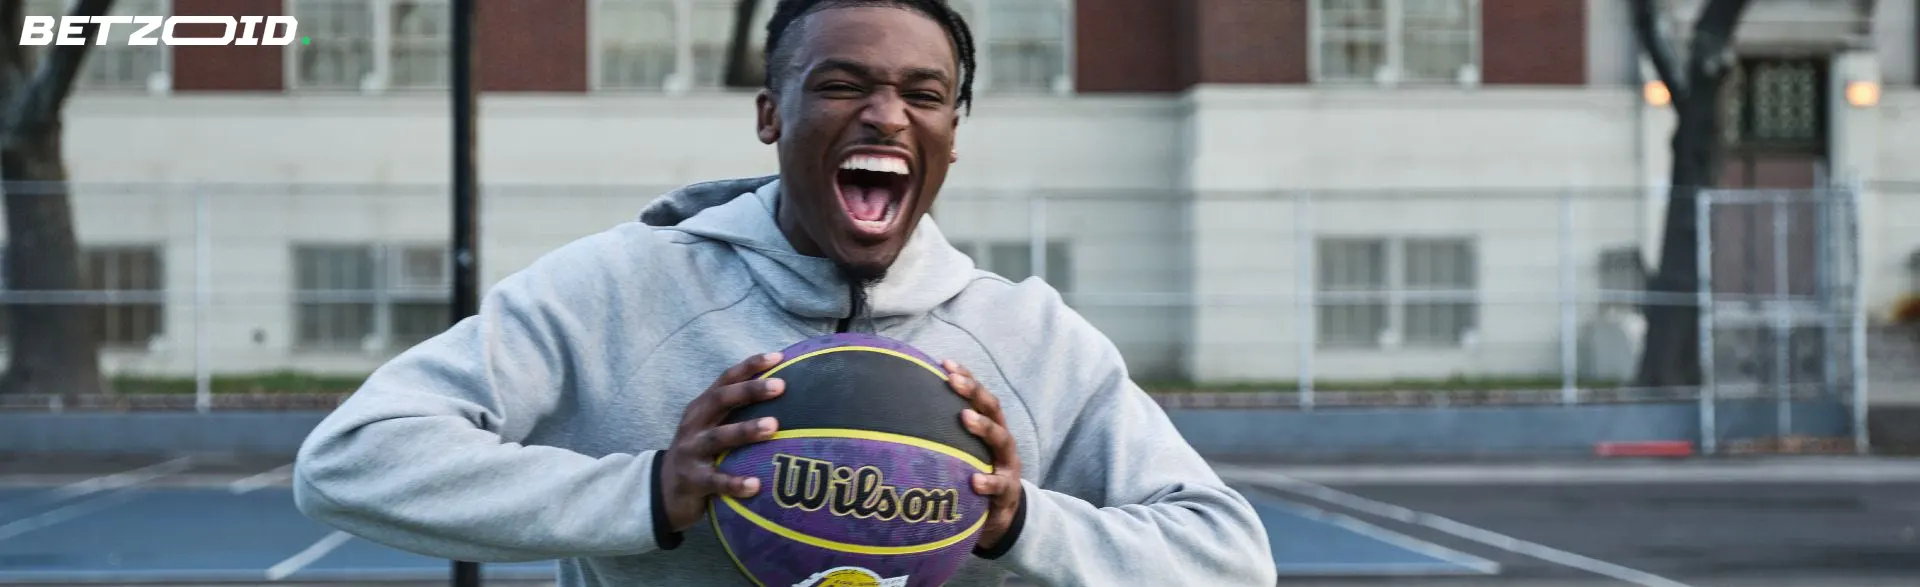 Excited basketball player holding a ball, representing the energetic sports culture covered by BC sportsbooks.